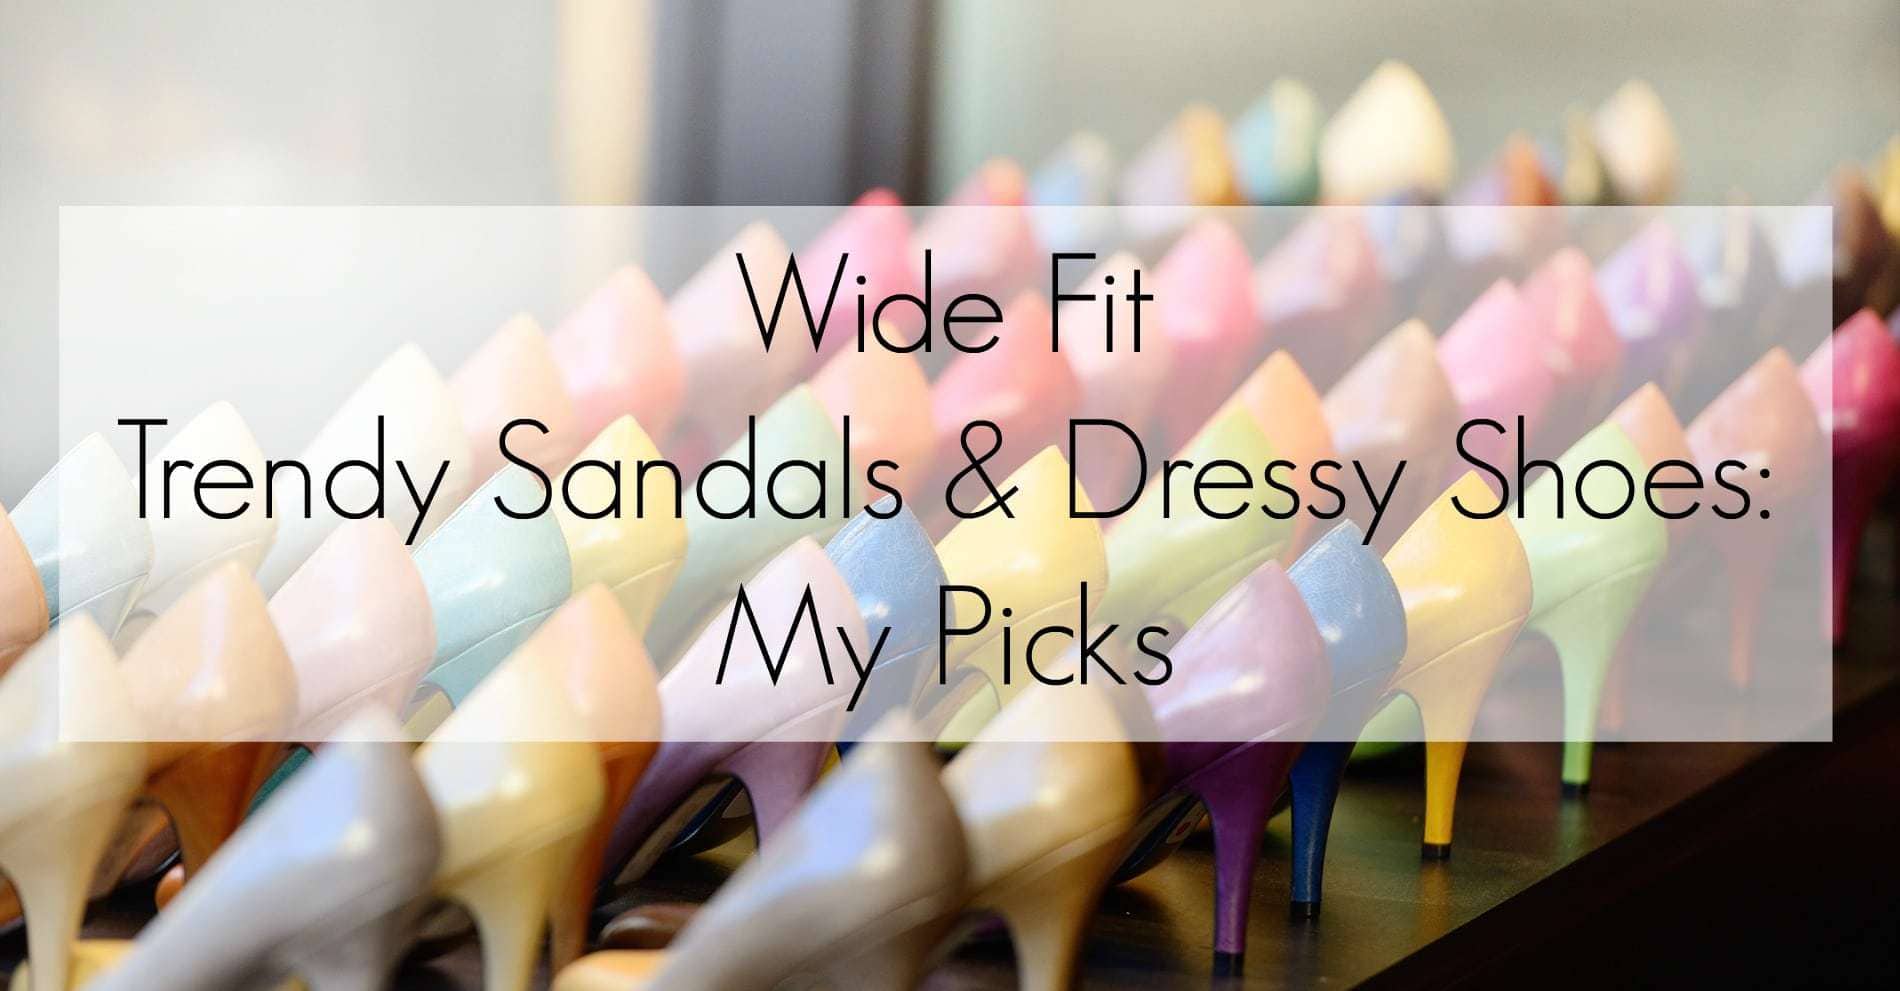 Wide Fit Trendy Sandals and Dressy Shoes: Shopping Hits and Misses